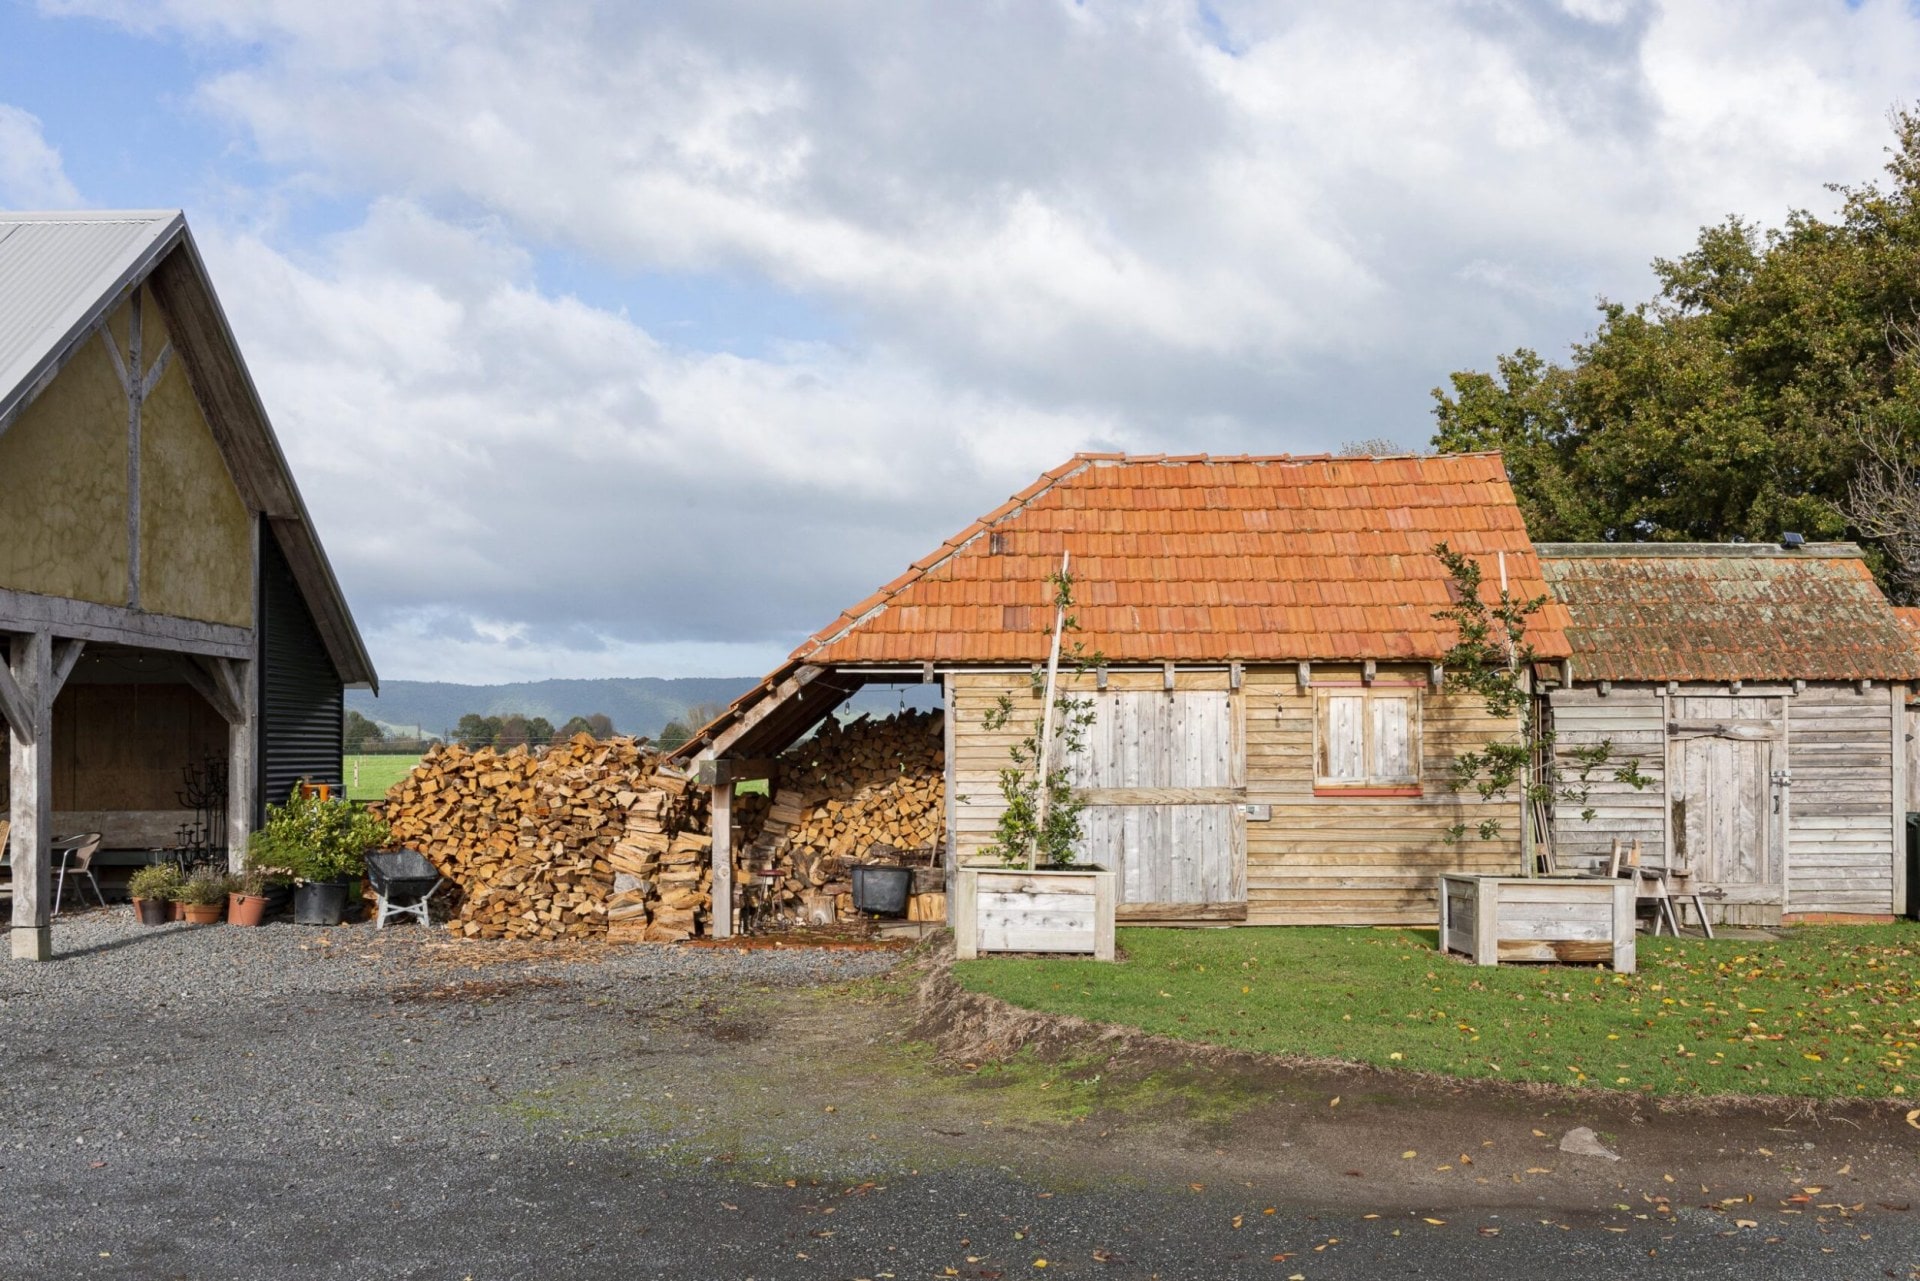 A wood cottage with an orange roof and large pile of cut firewood